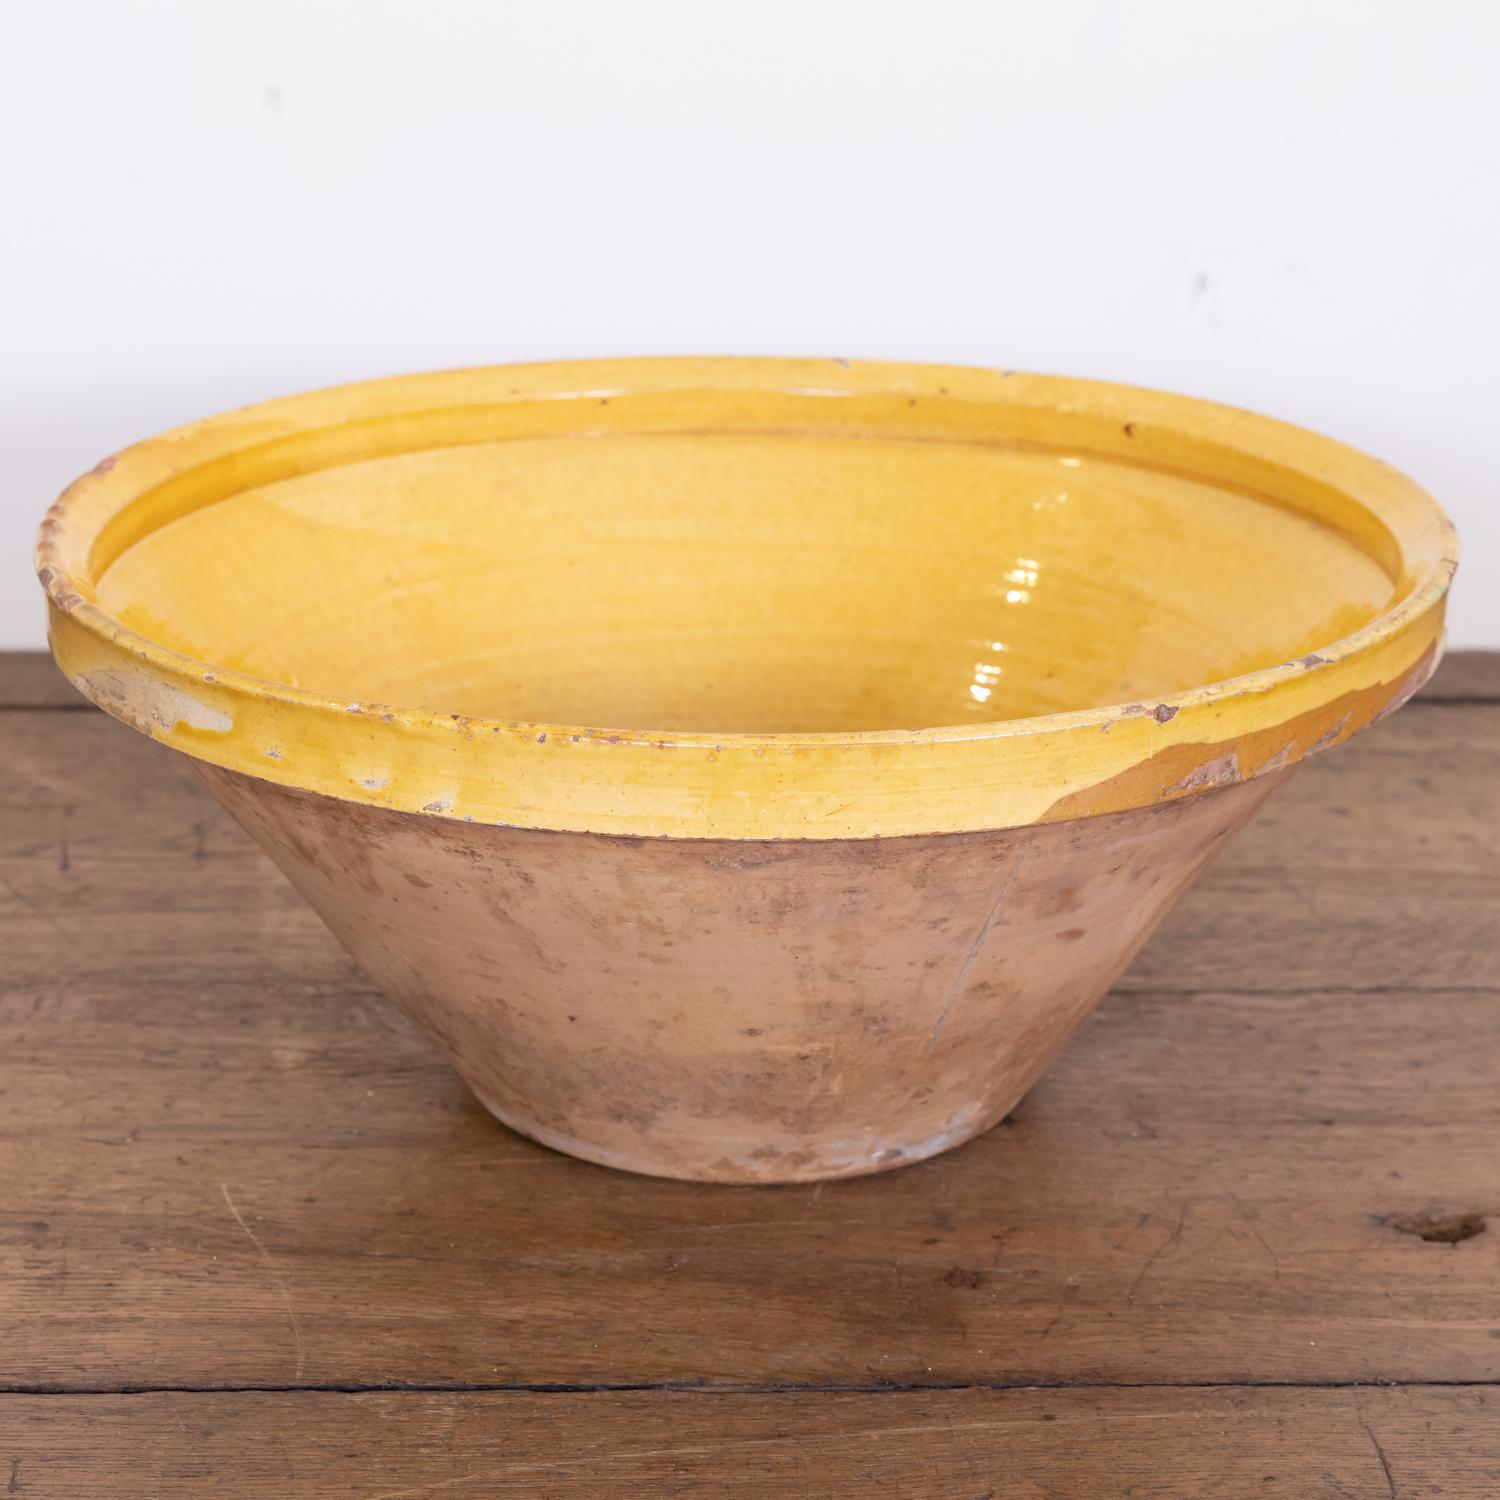 Late 19th Century Antique French Terracotta Pancheon or Dough Bowl with Yellow Glaze